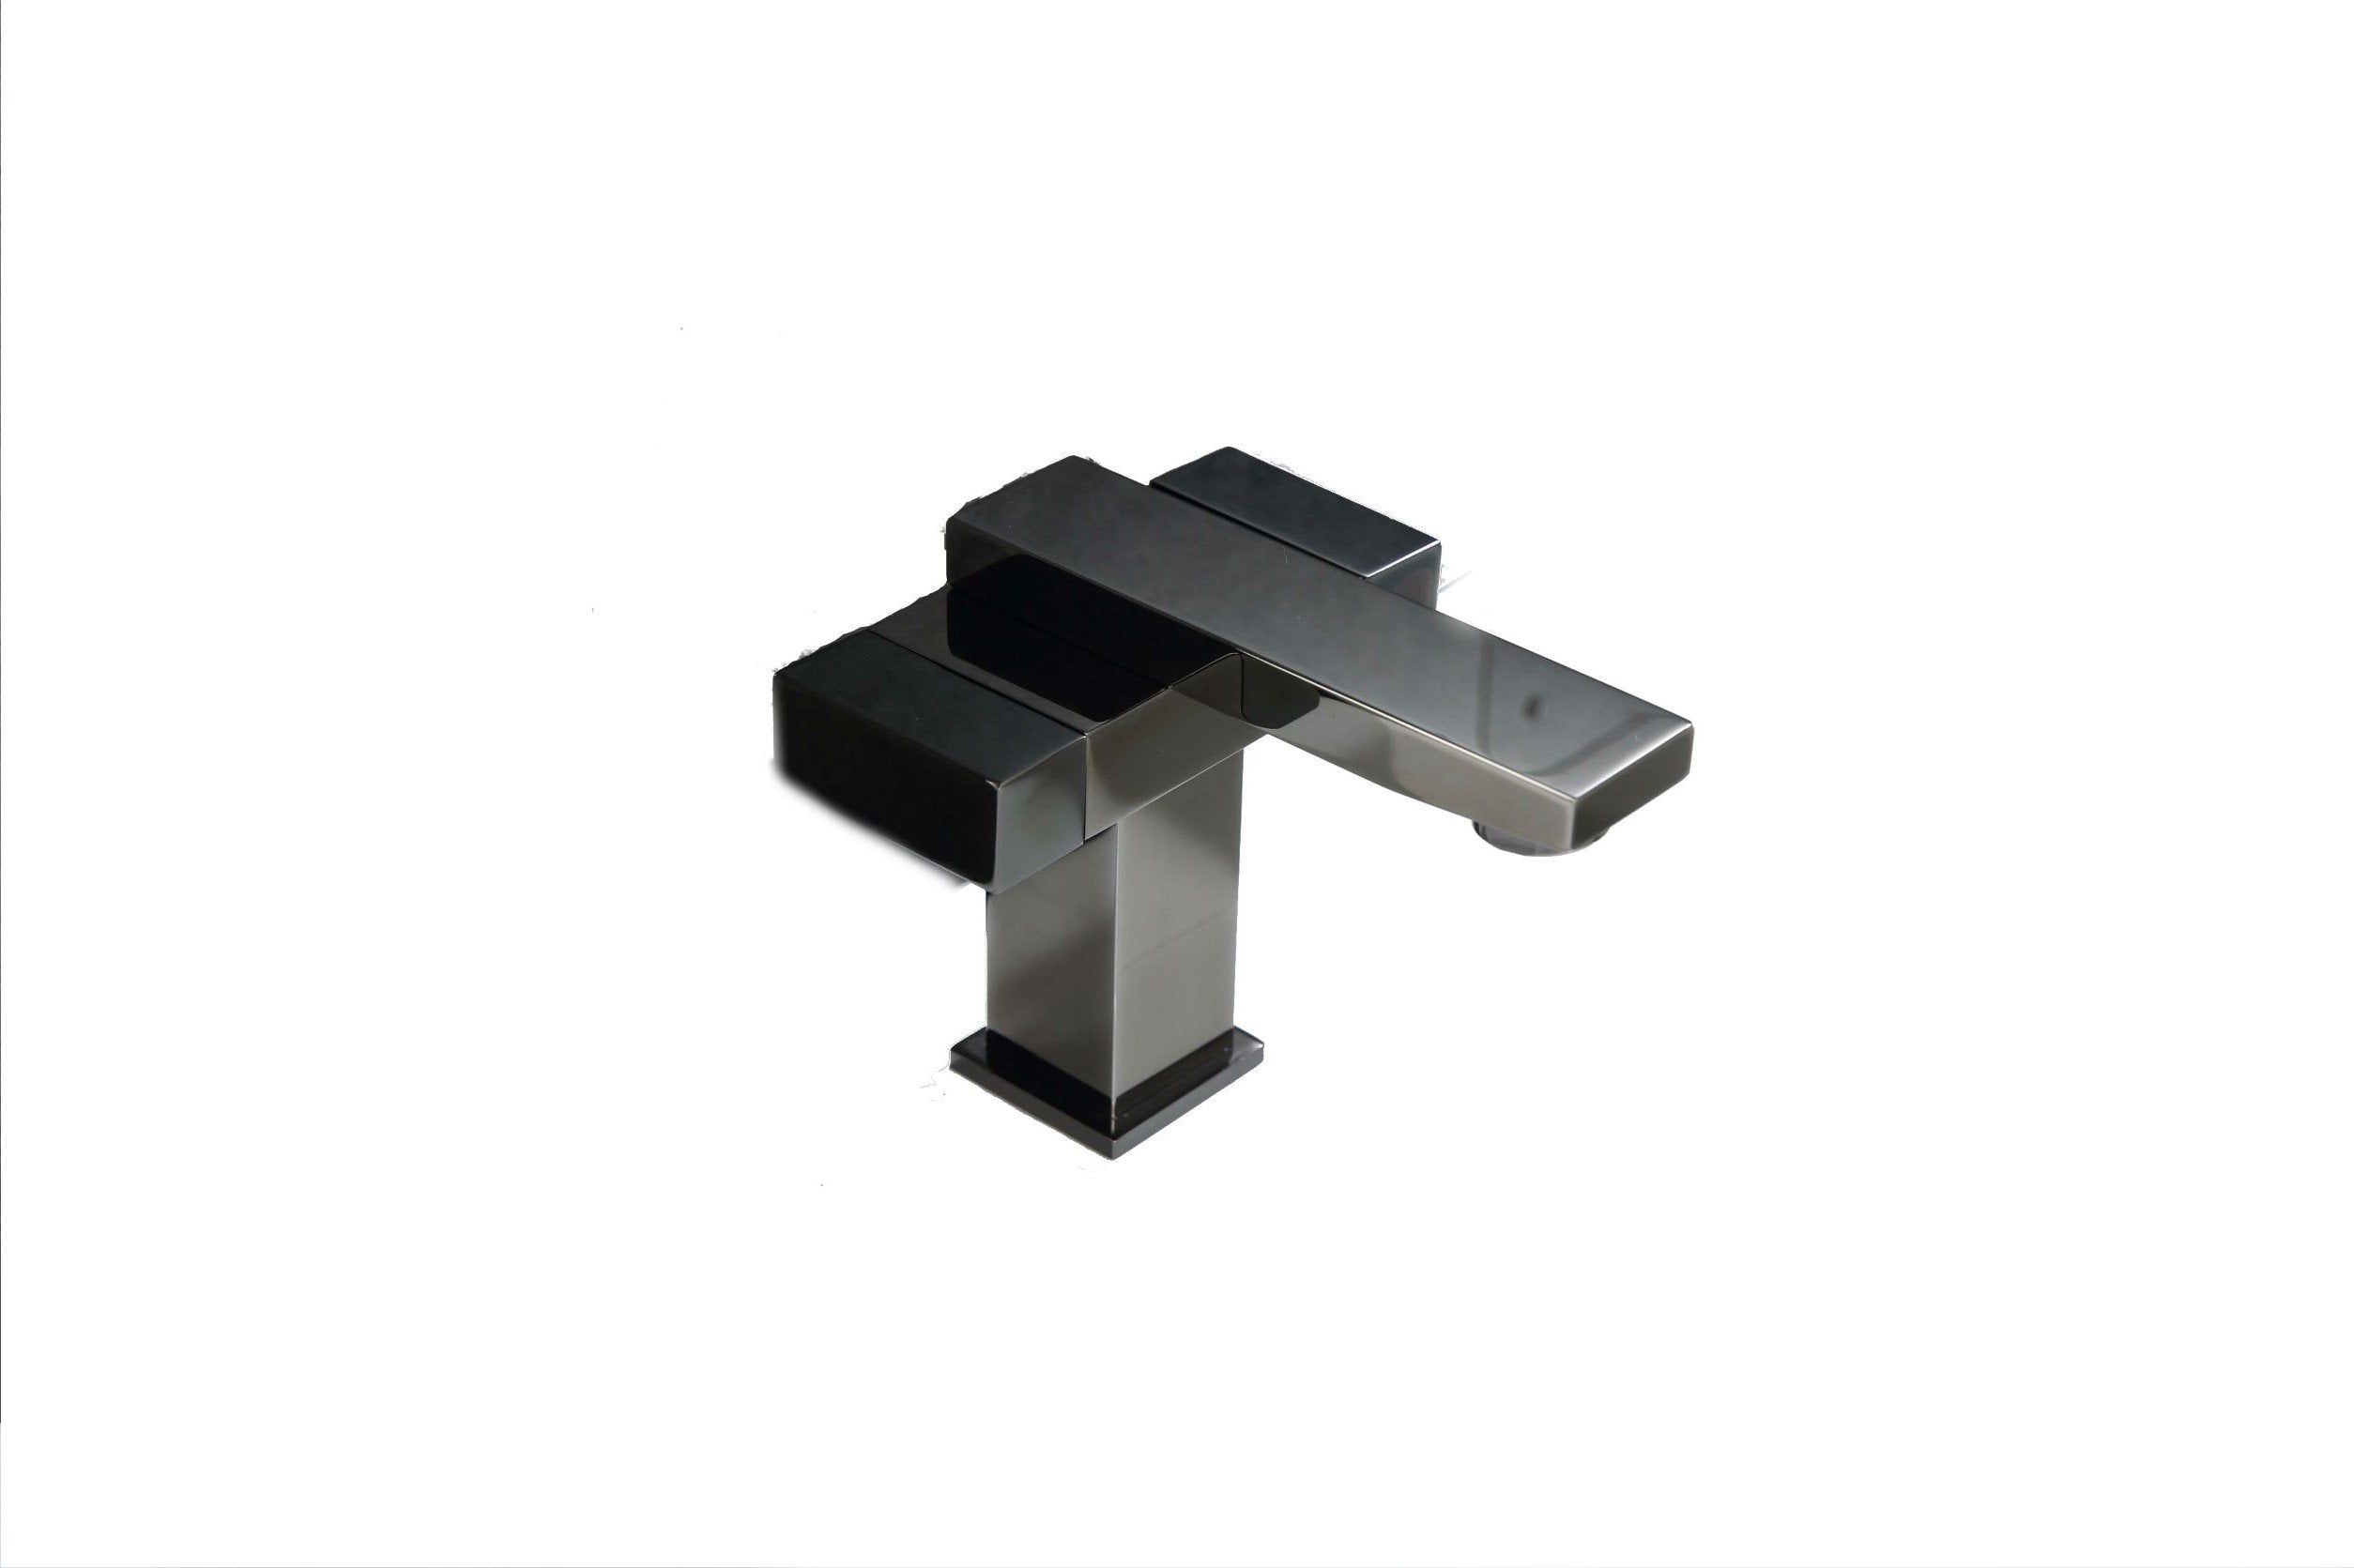 Faucet with Drain ZY6051 - East Shore Modern Home Furnishings